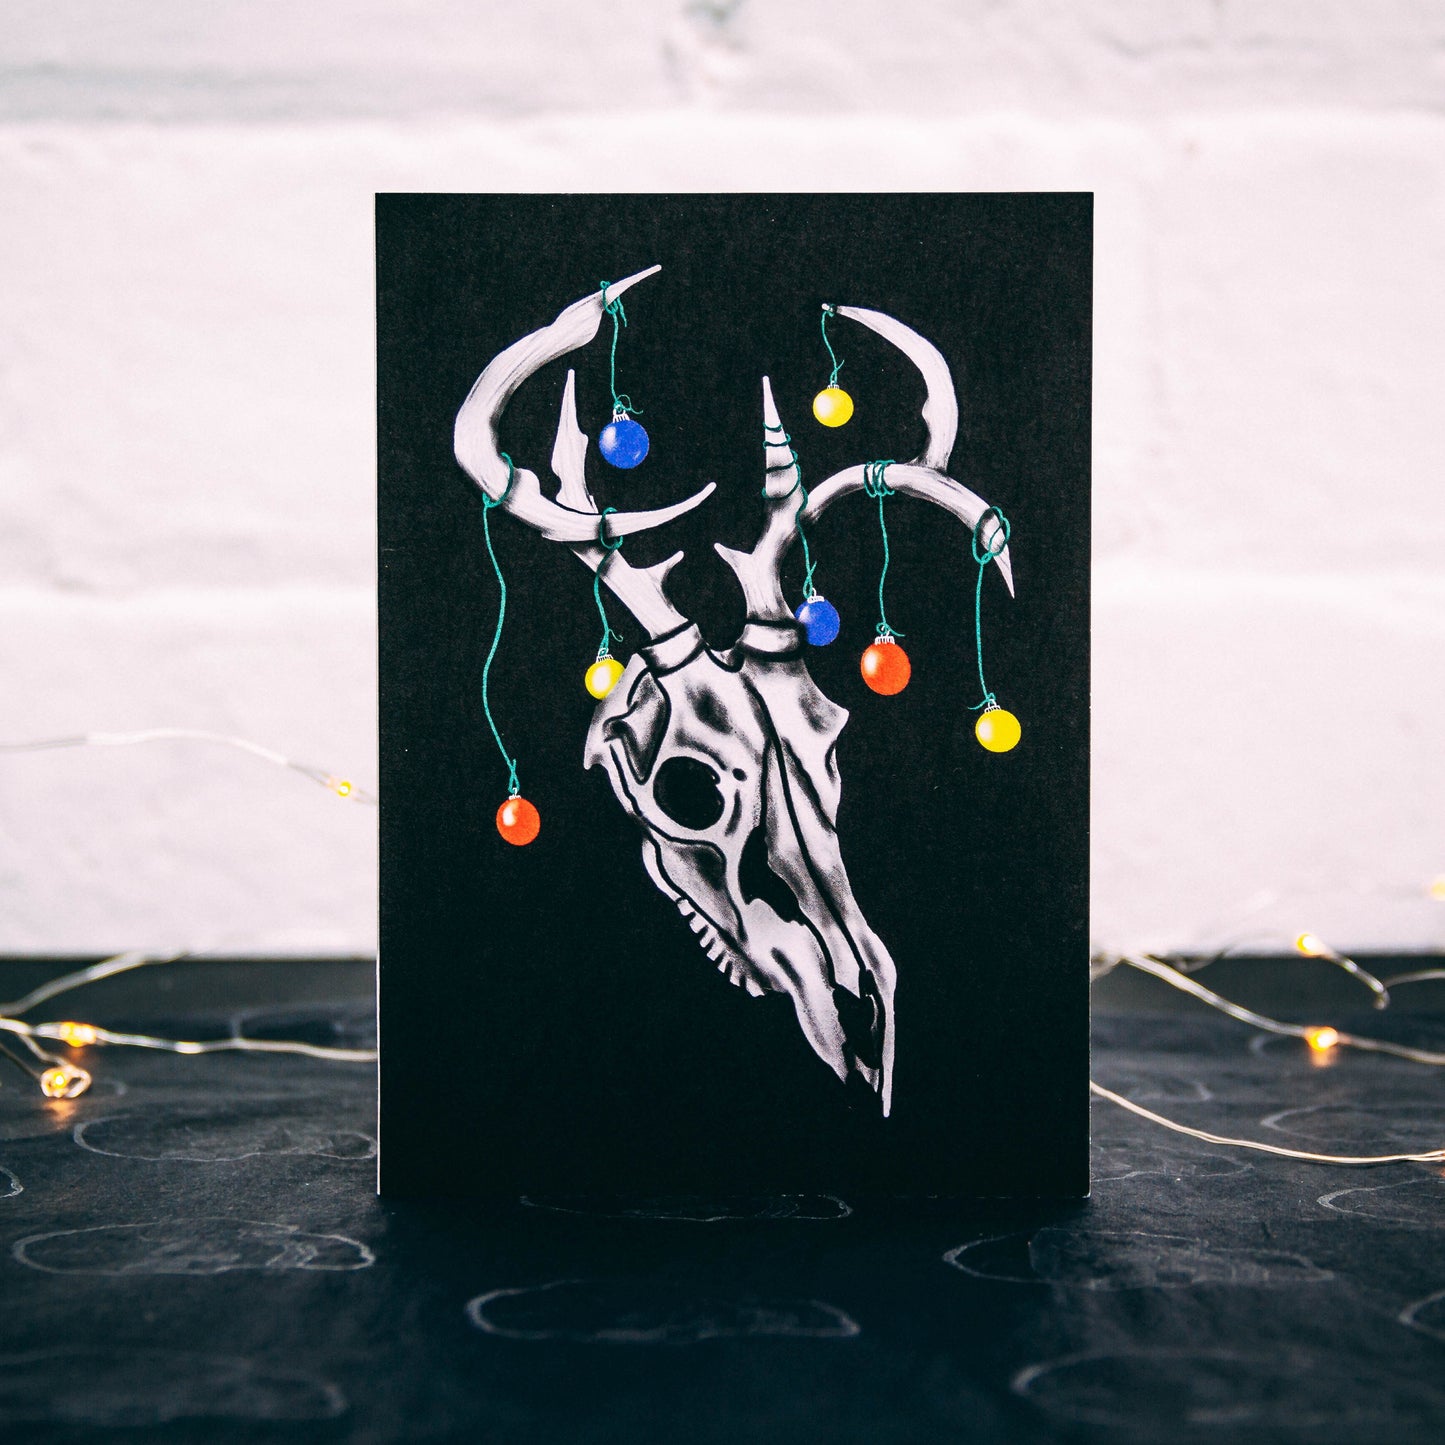 Black Christmas Card with Illustrated deer with Christmas baubles on its horns. Designed by Wayward 